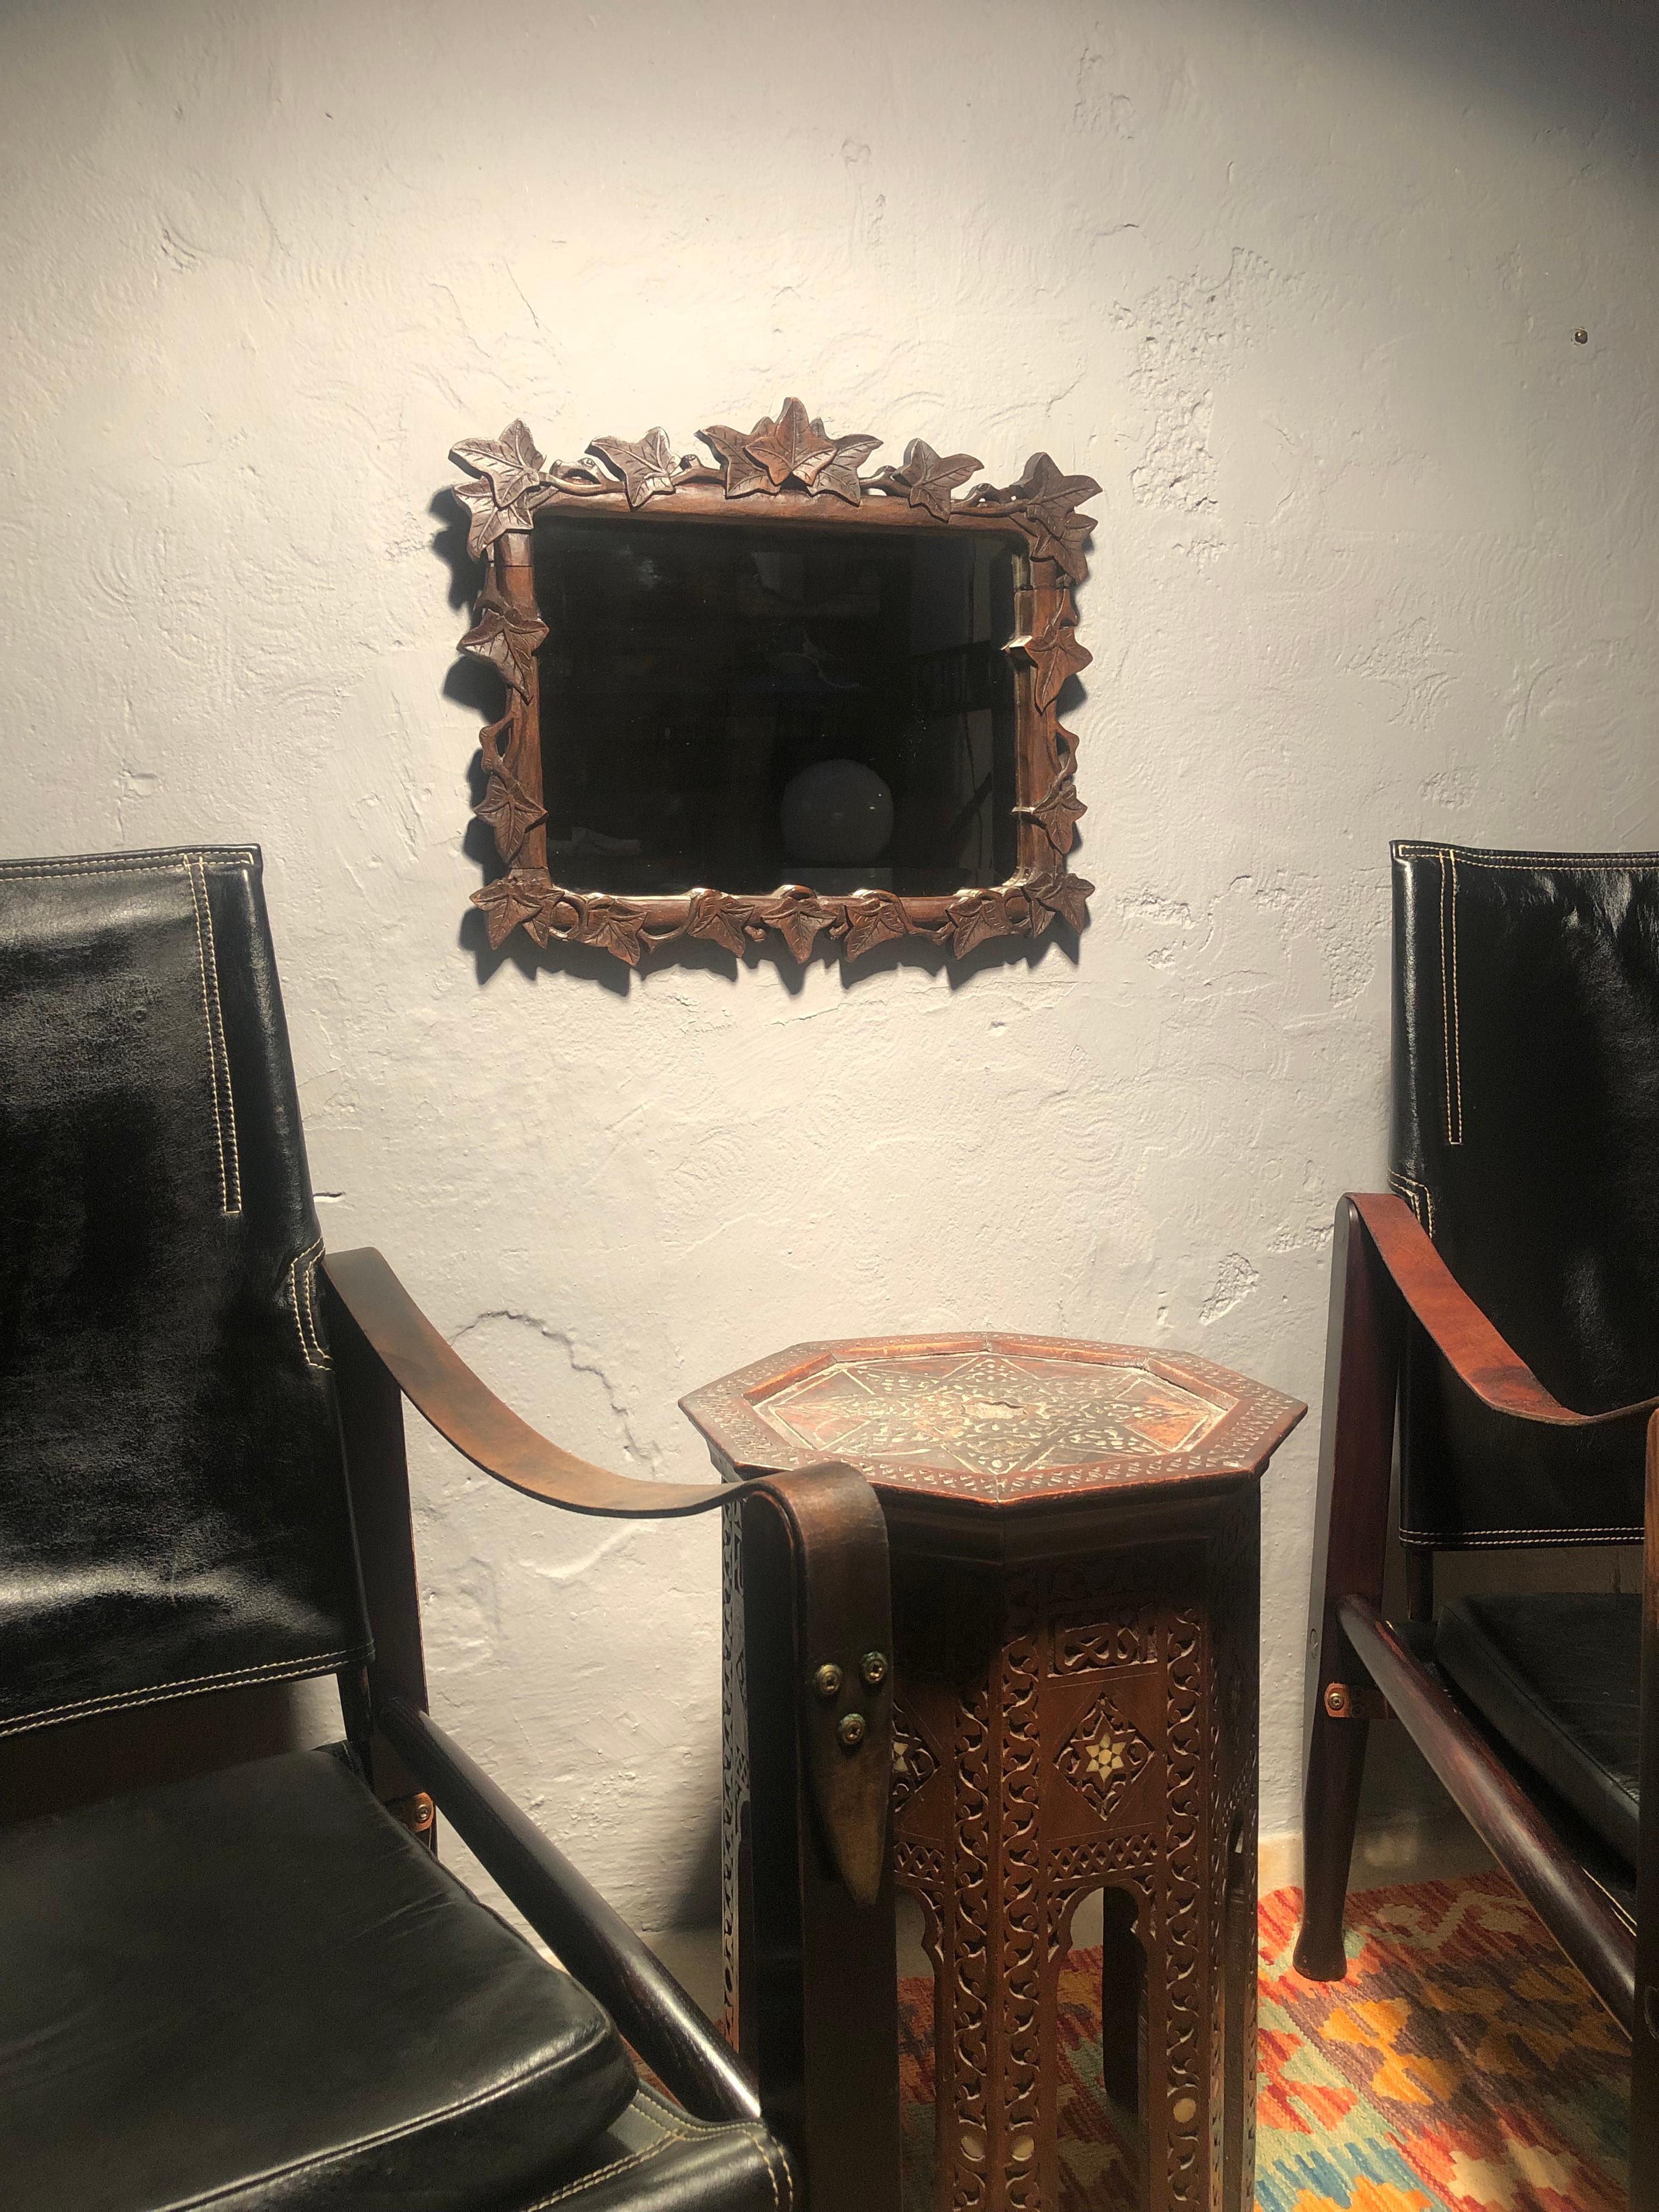 Antique wall mirror from the late 1800s.
This beautiful hand carved mirror is in original condition with the original beveled glass plate that has never been out of the frame and therefore it also maintains the original back plate. 
There is no